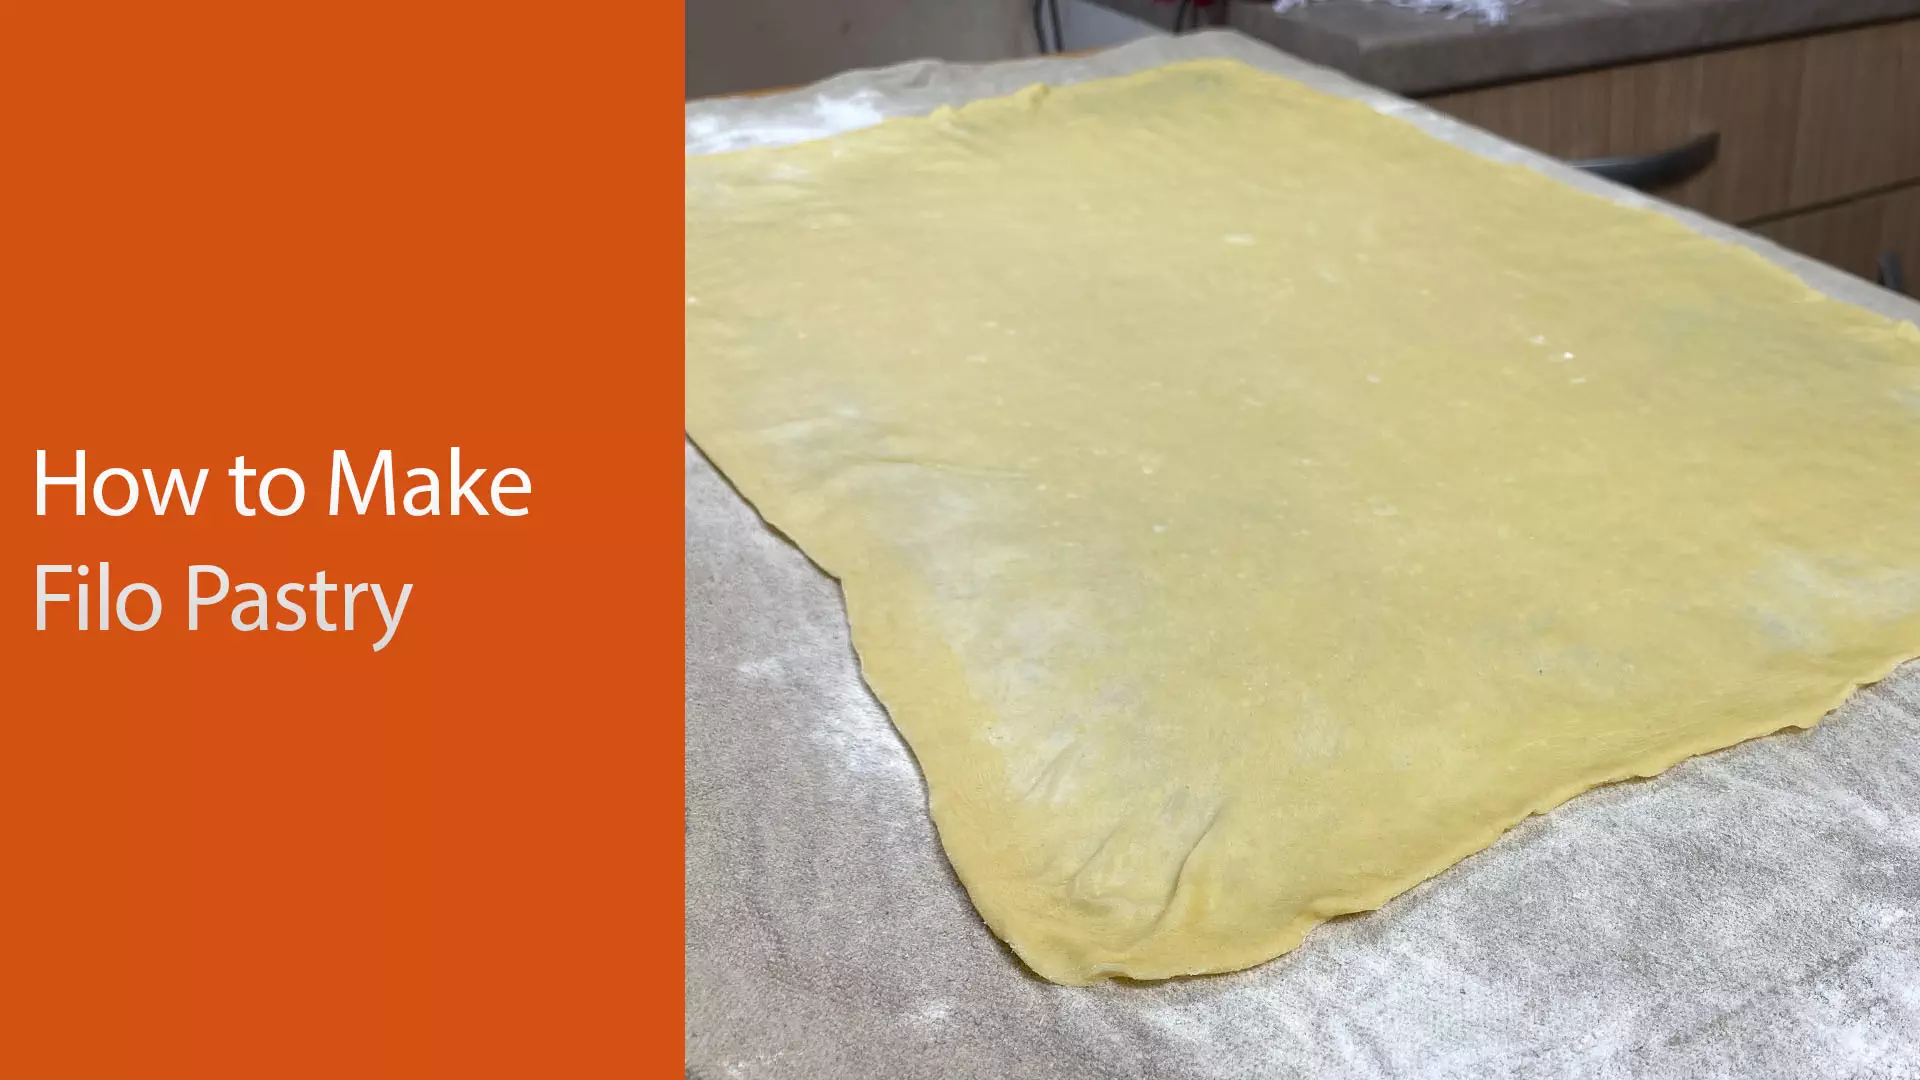 How to make filo pastry from scratch